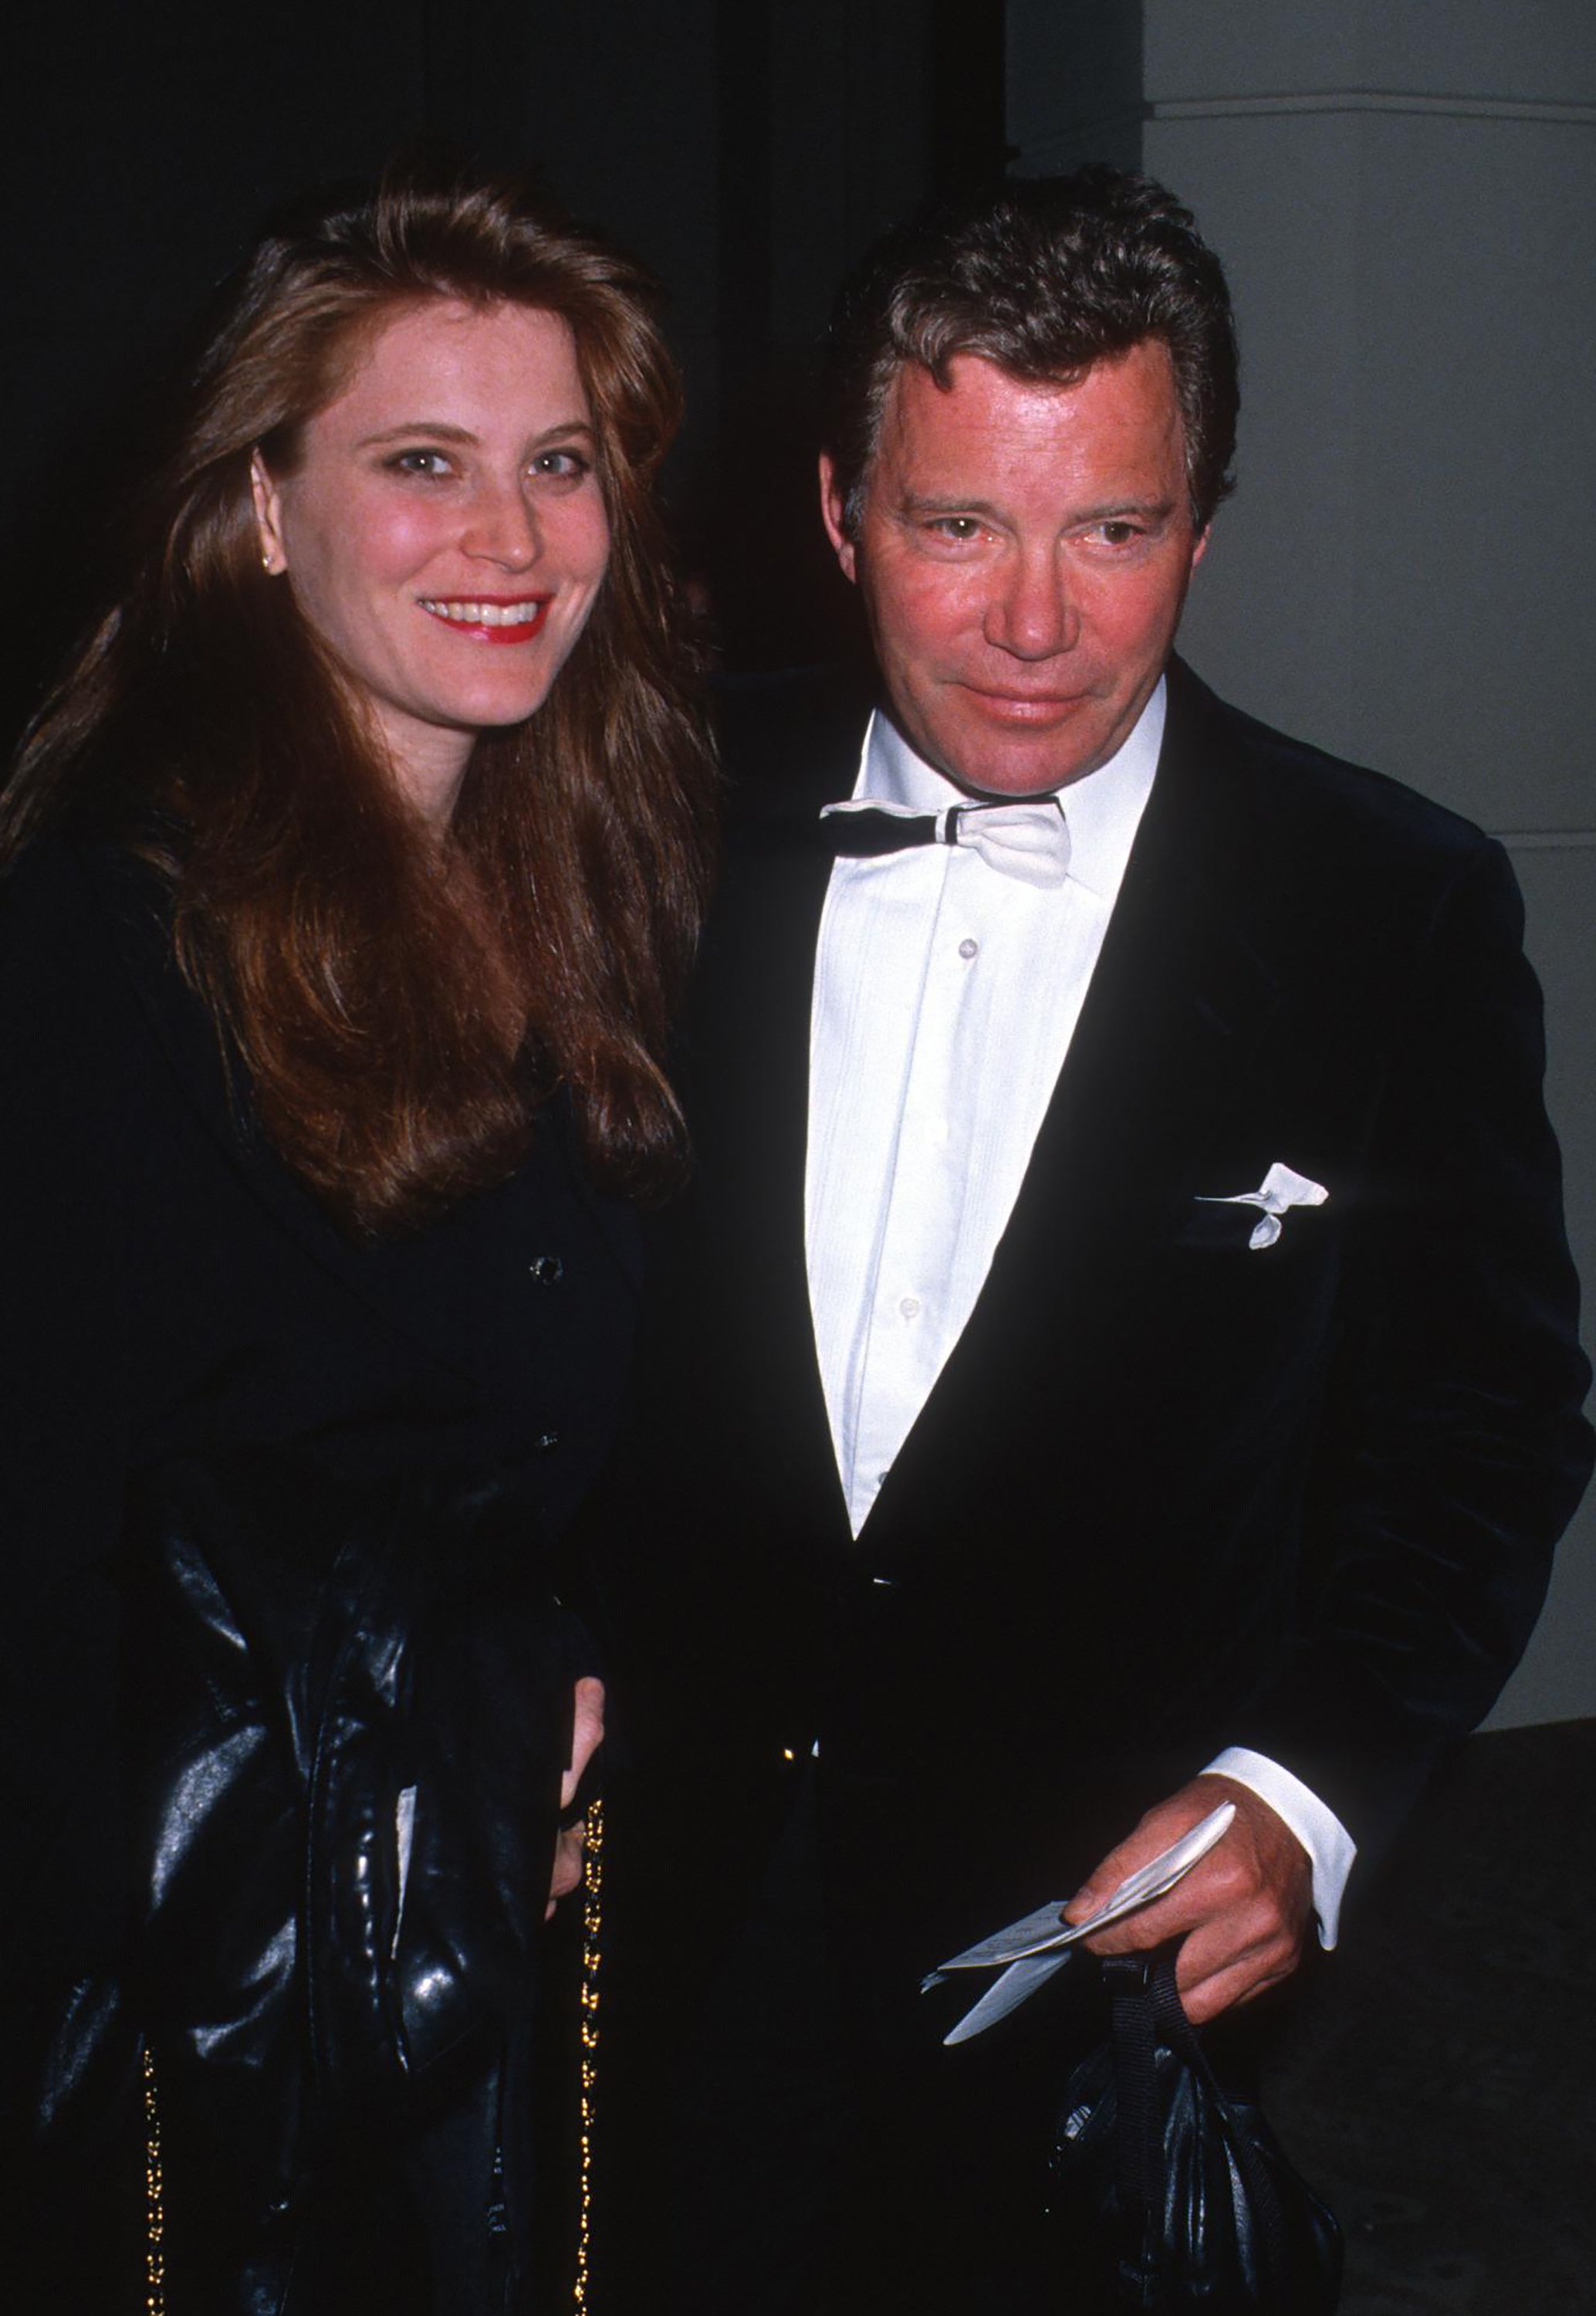 William Shatner and one of his daughters at the 42nd Annual Writers Guild of America Awards on March 18, 1990, in California. | Source: Getty Images